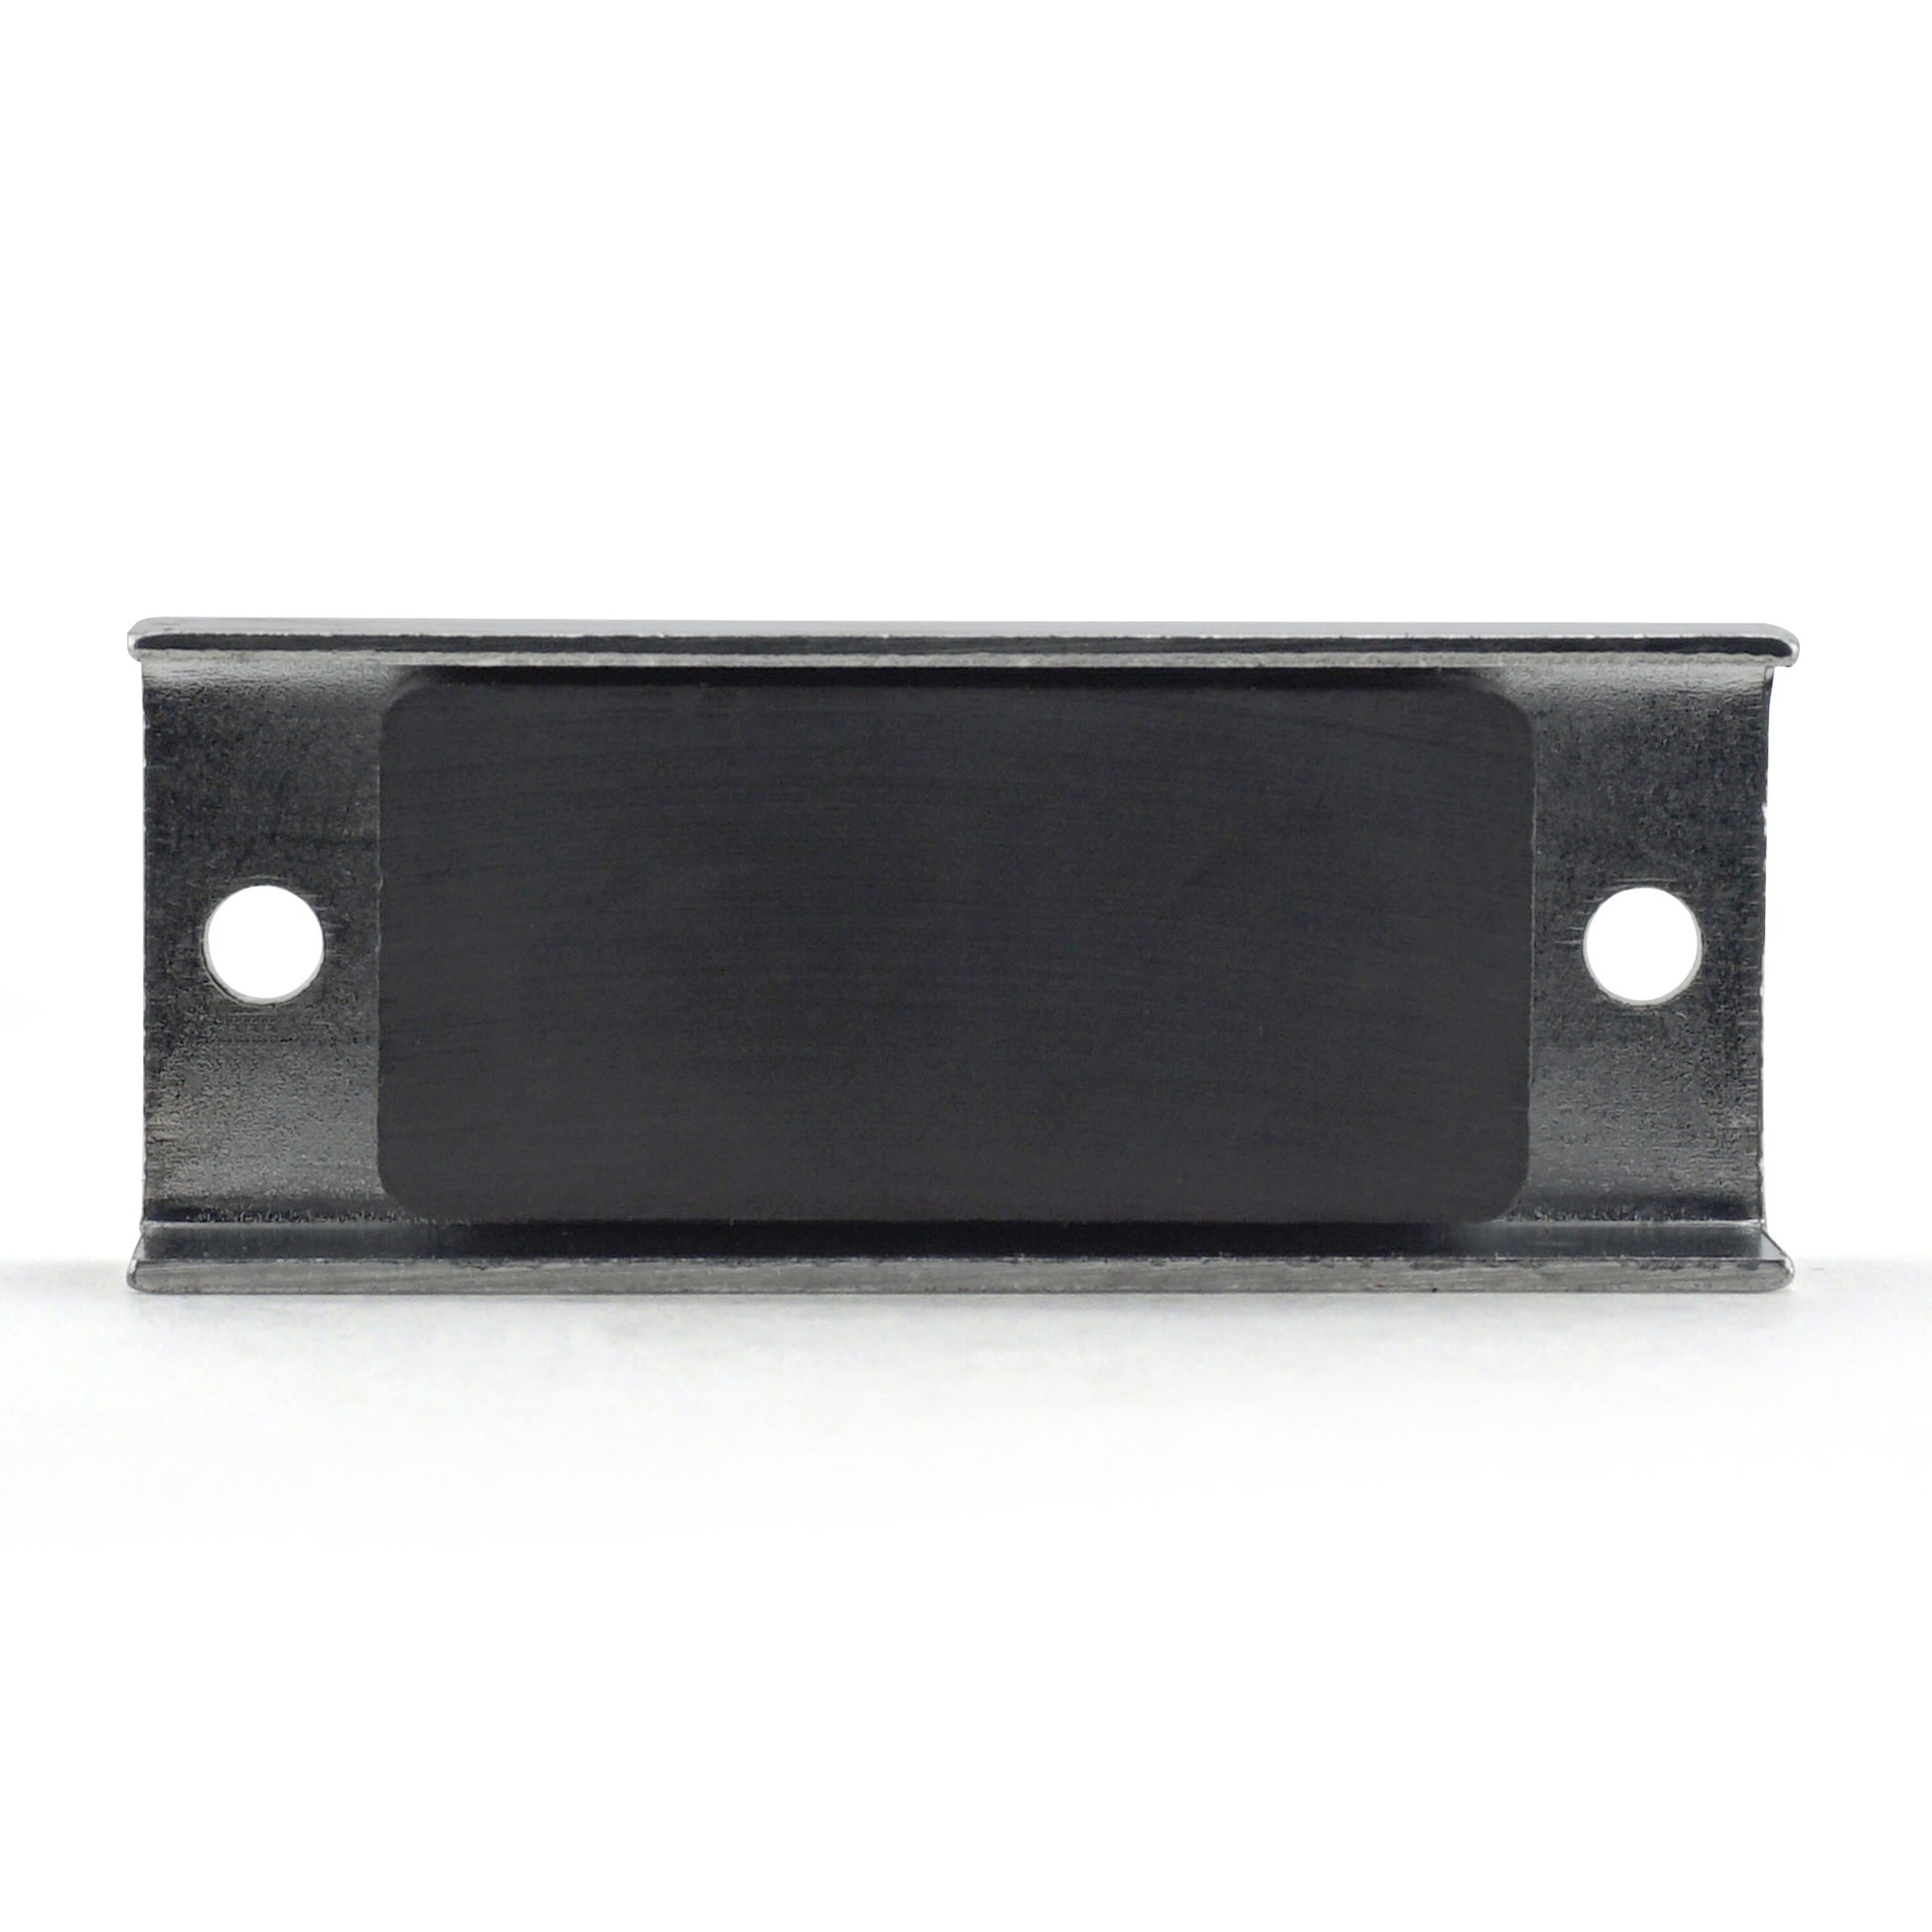 Load image into Gallery viewer, 07575 Ceramic Latch Magnet Channel Assembly - Front View